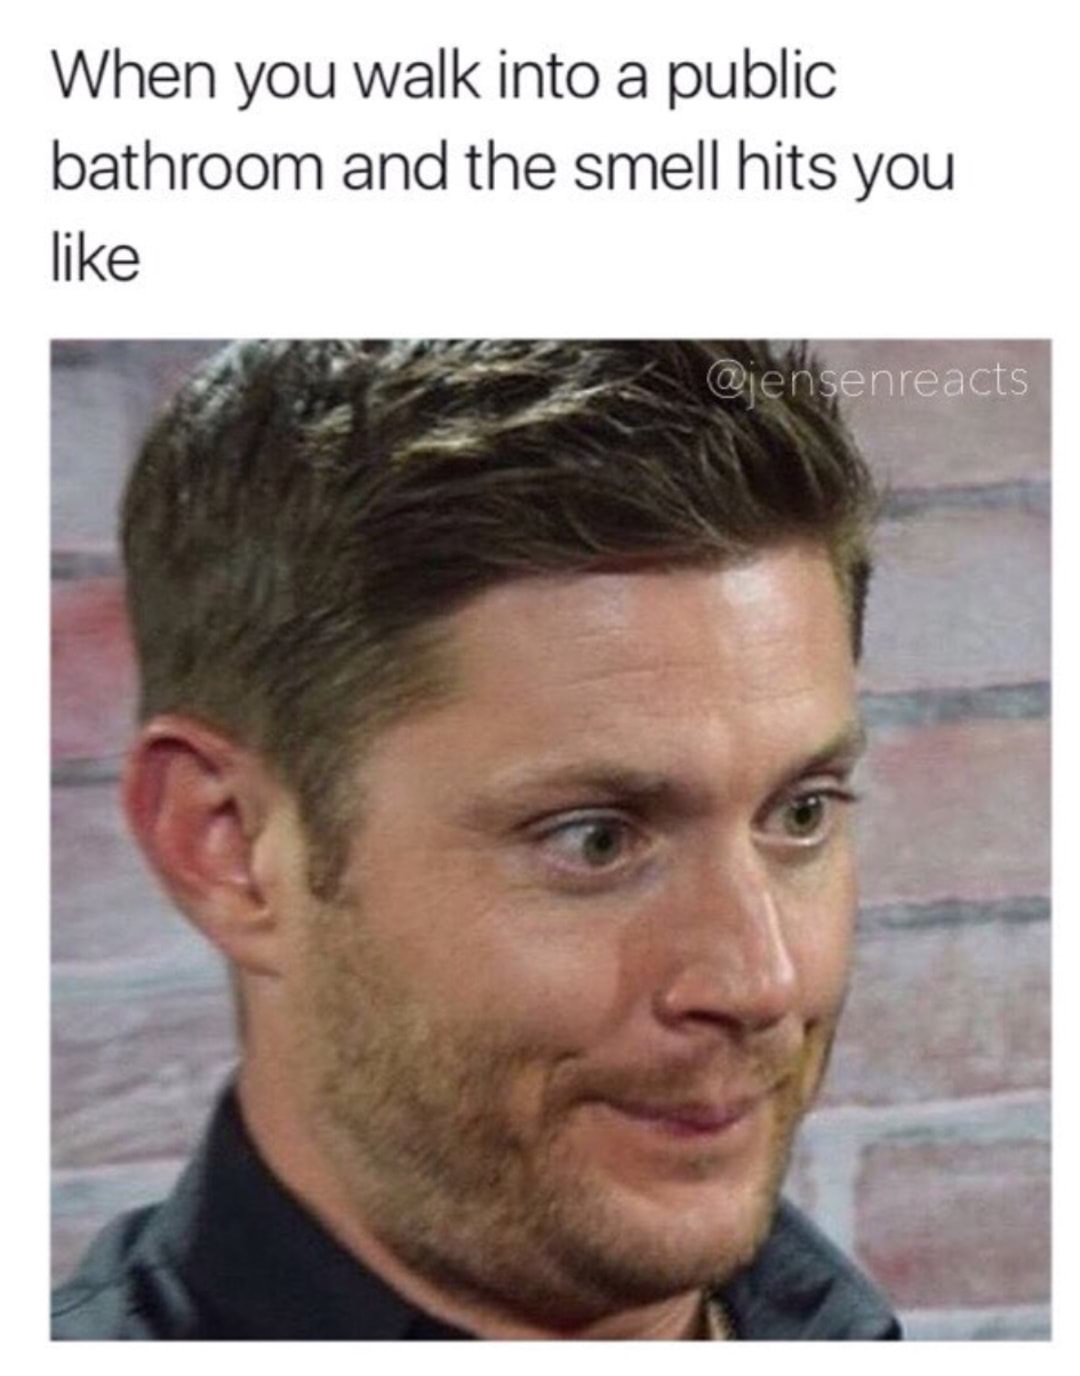 dank meme dank memes to make you smile - When you walk into a public bathroom and the smell hits you